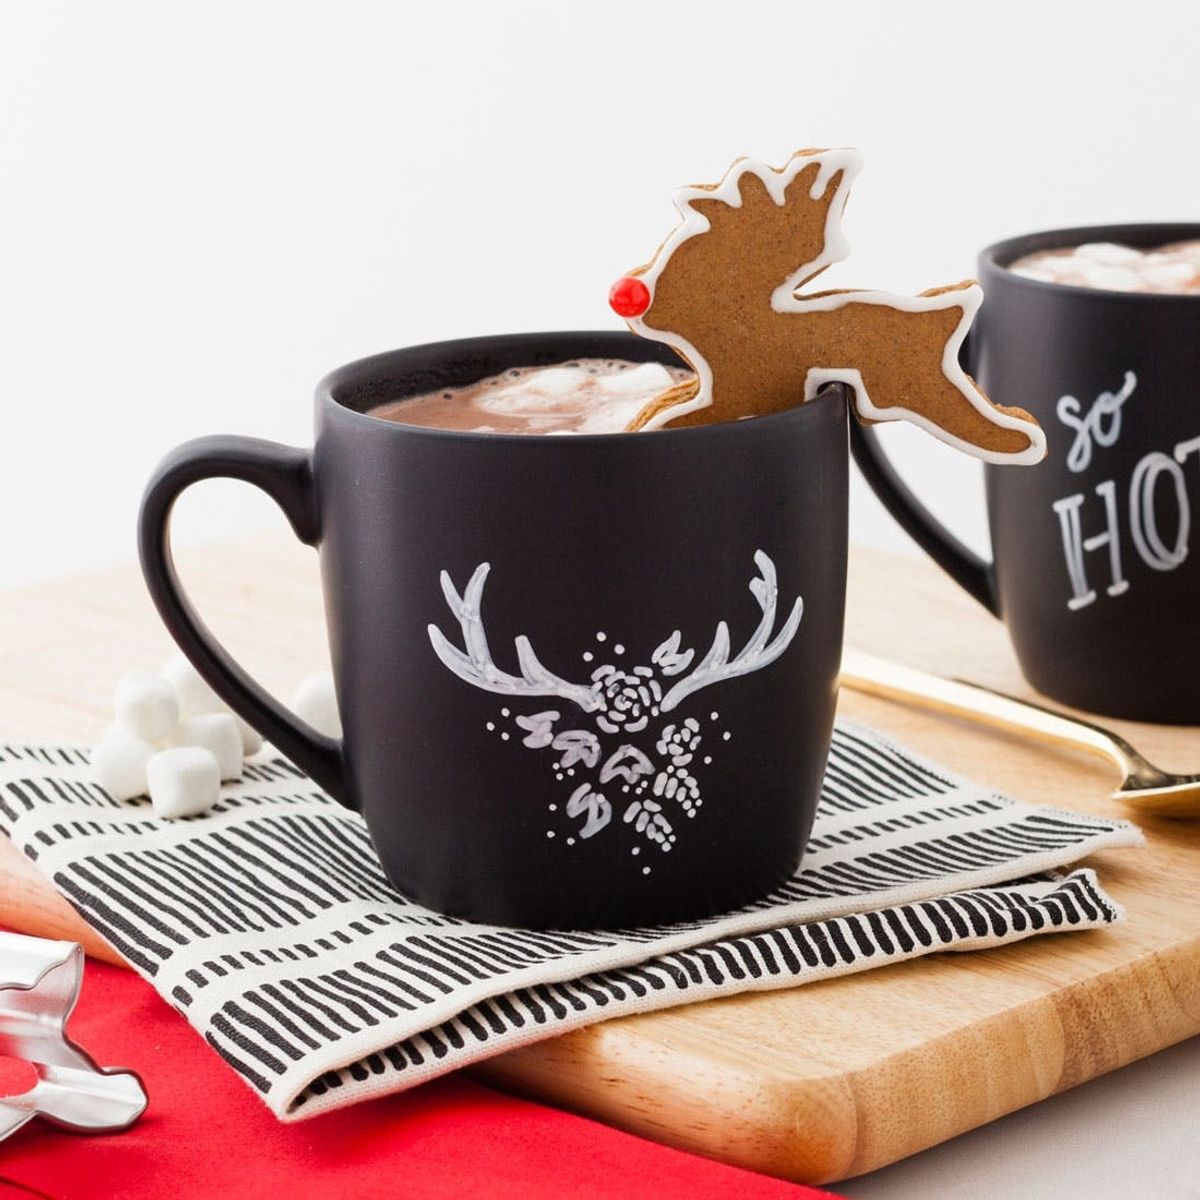 Make the Cutest Cup of Hot Cocoa You’ve Ever Had With This Holiday Reindeer Mug